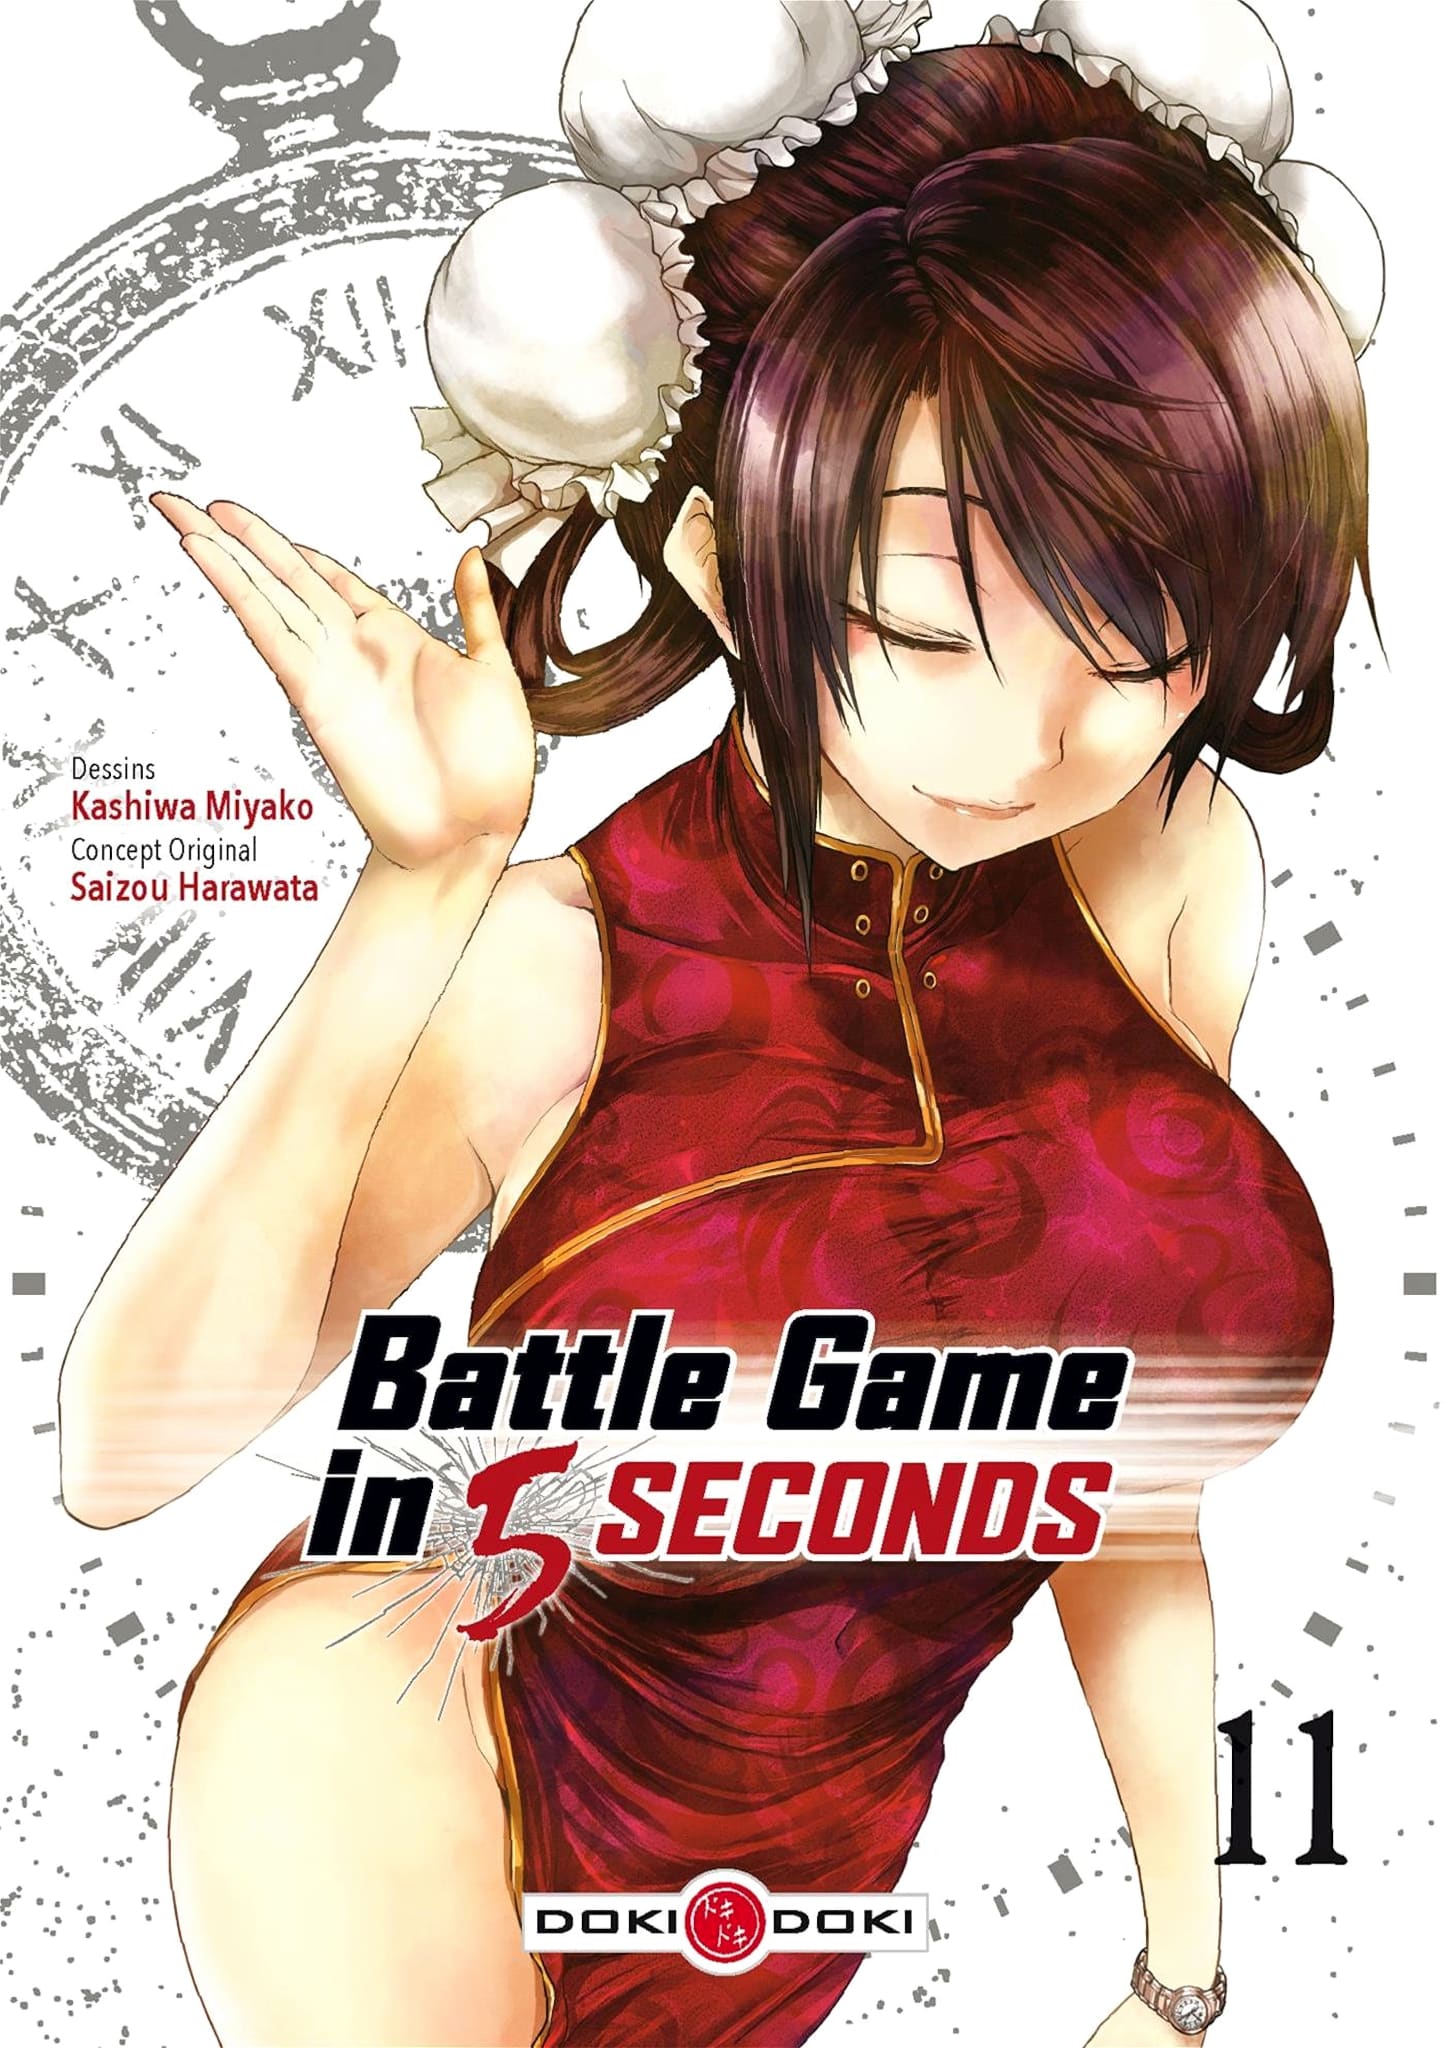 Tome 11 du manga Battle Game in 5 Seconds